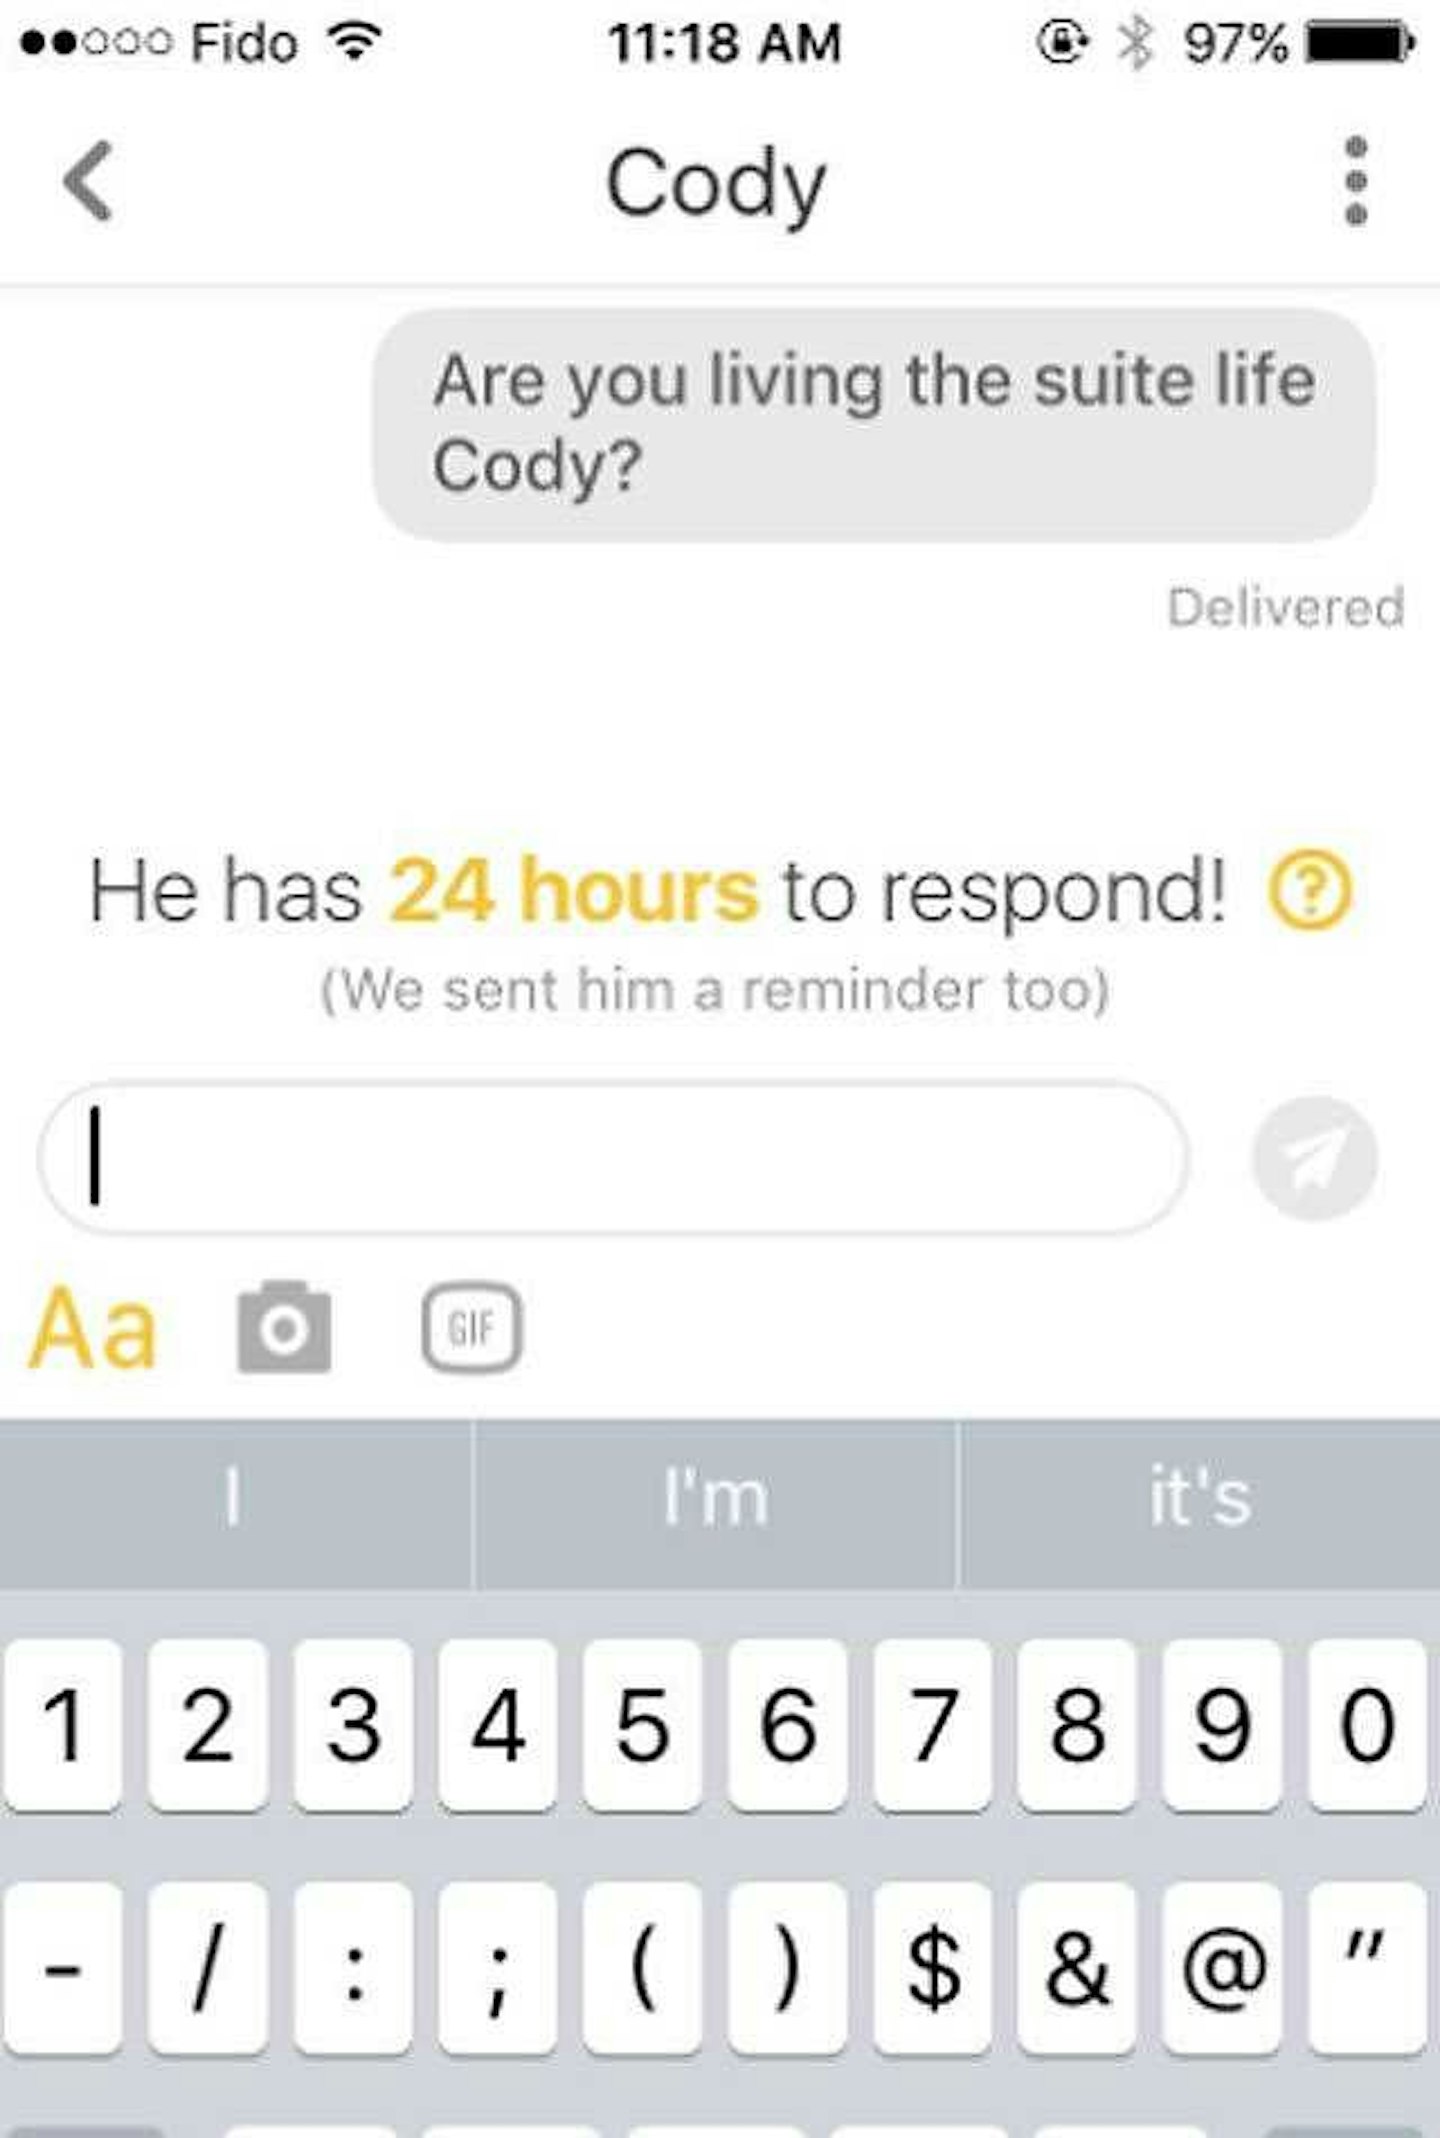 bumble opening lines